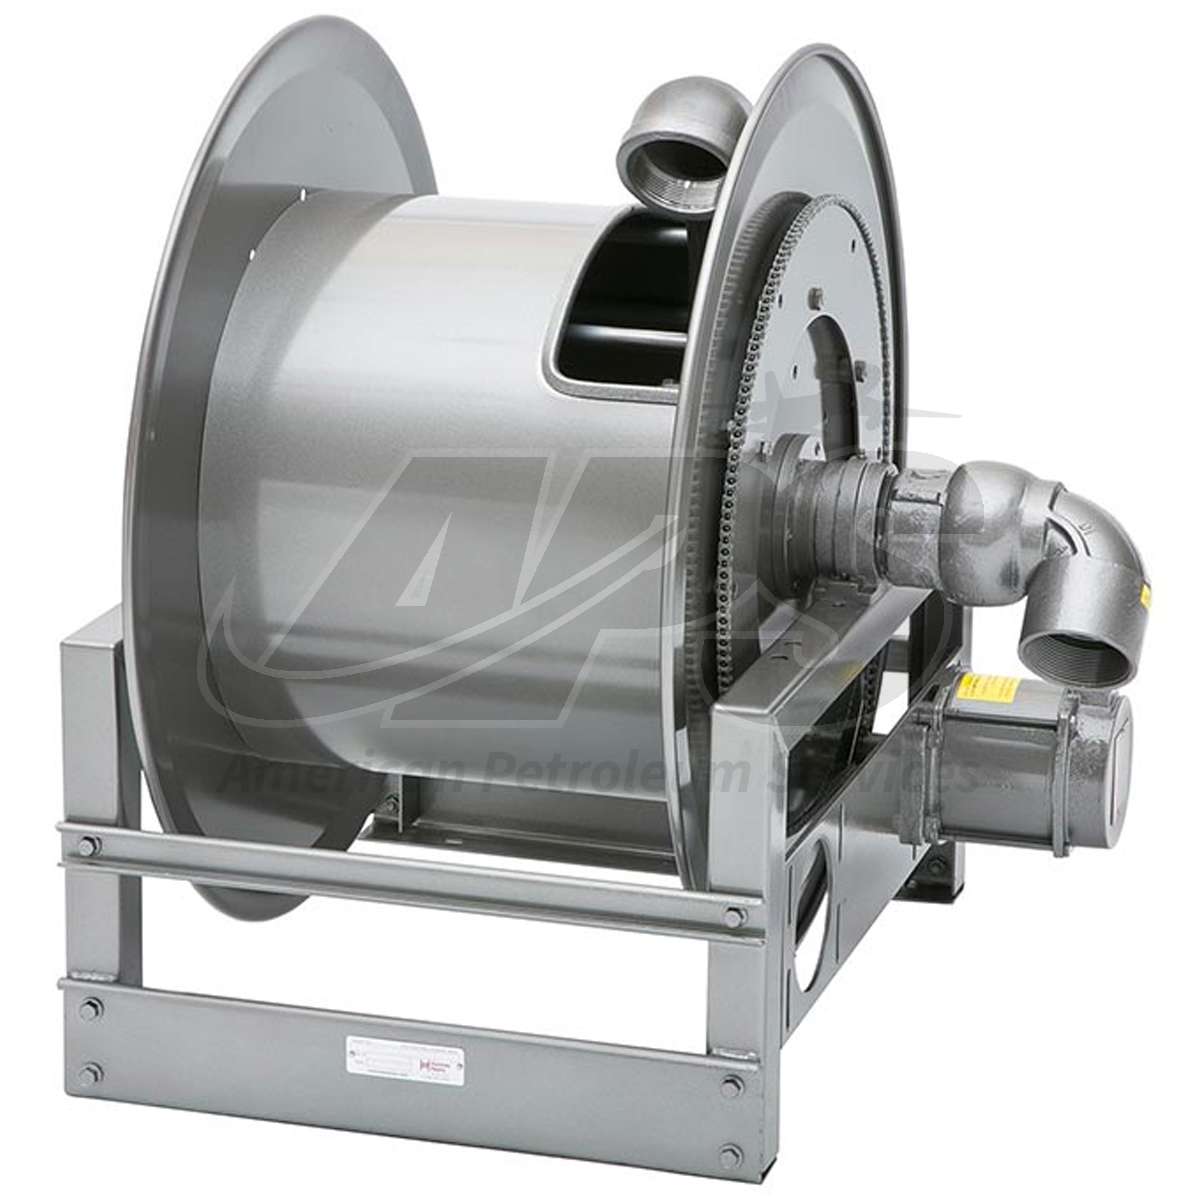 V-EPJ-340-26-27 SERIES V-3 HOSE REEL (2-1/2 X 35' CAPACITY, EXPLOSION  PROOF ELECTRIC REWIND, 12V DC, W/ AUXILIARY CRANK)